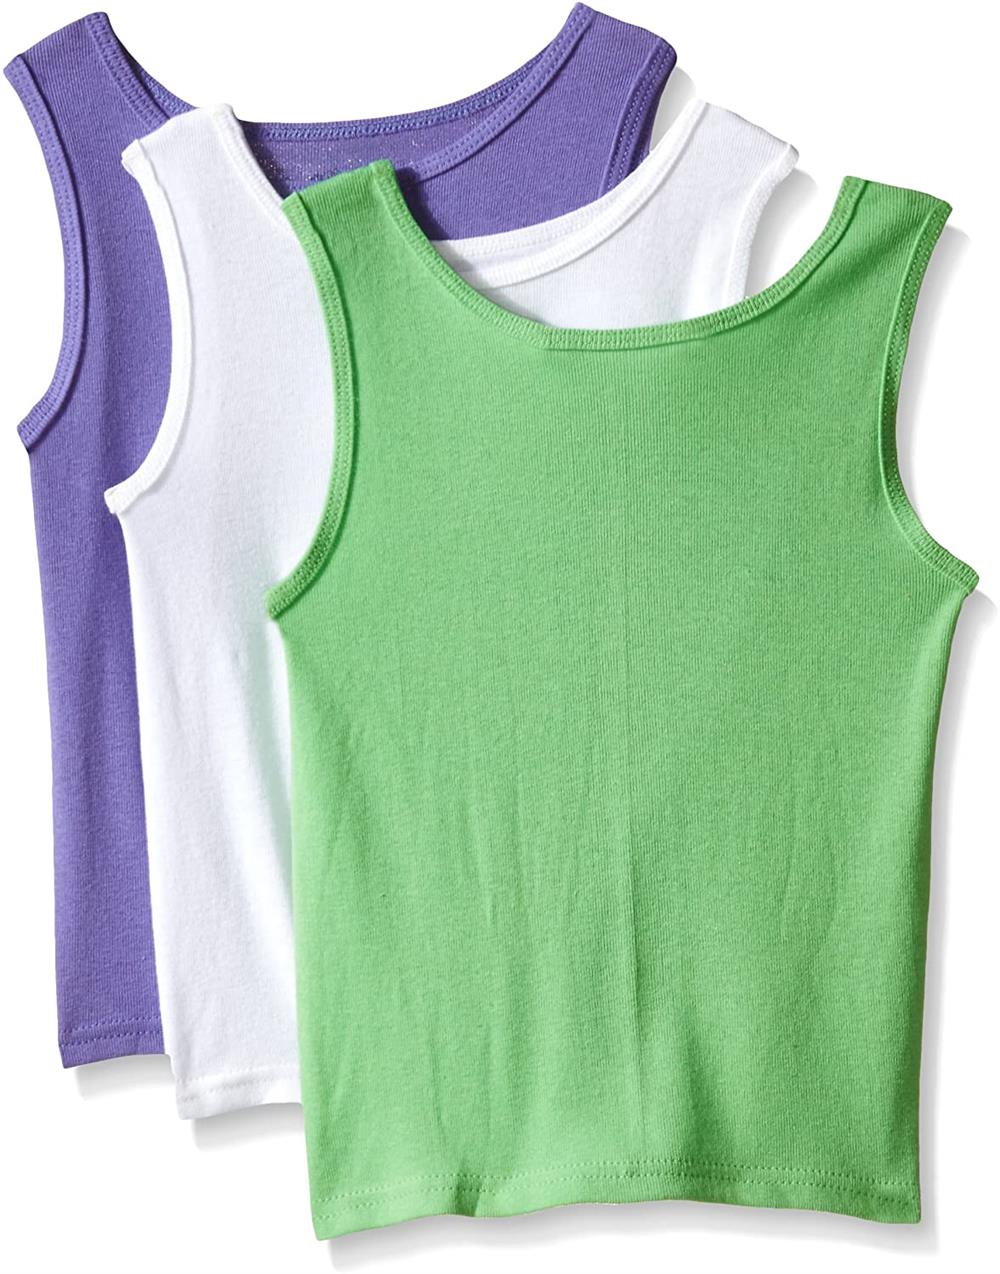 Fruit of the Loom Girls' Undershirts, Layering Tank Tops, 10 Pack